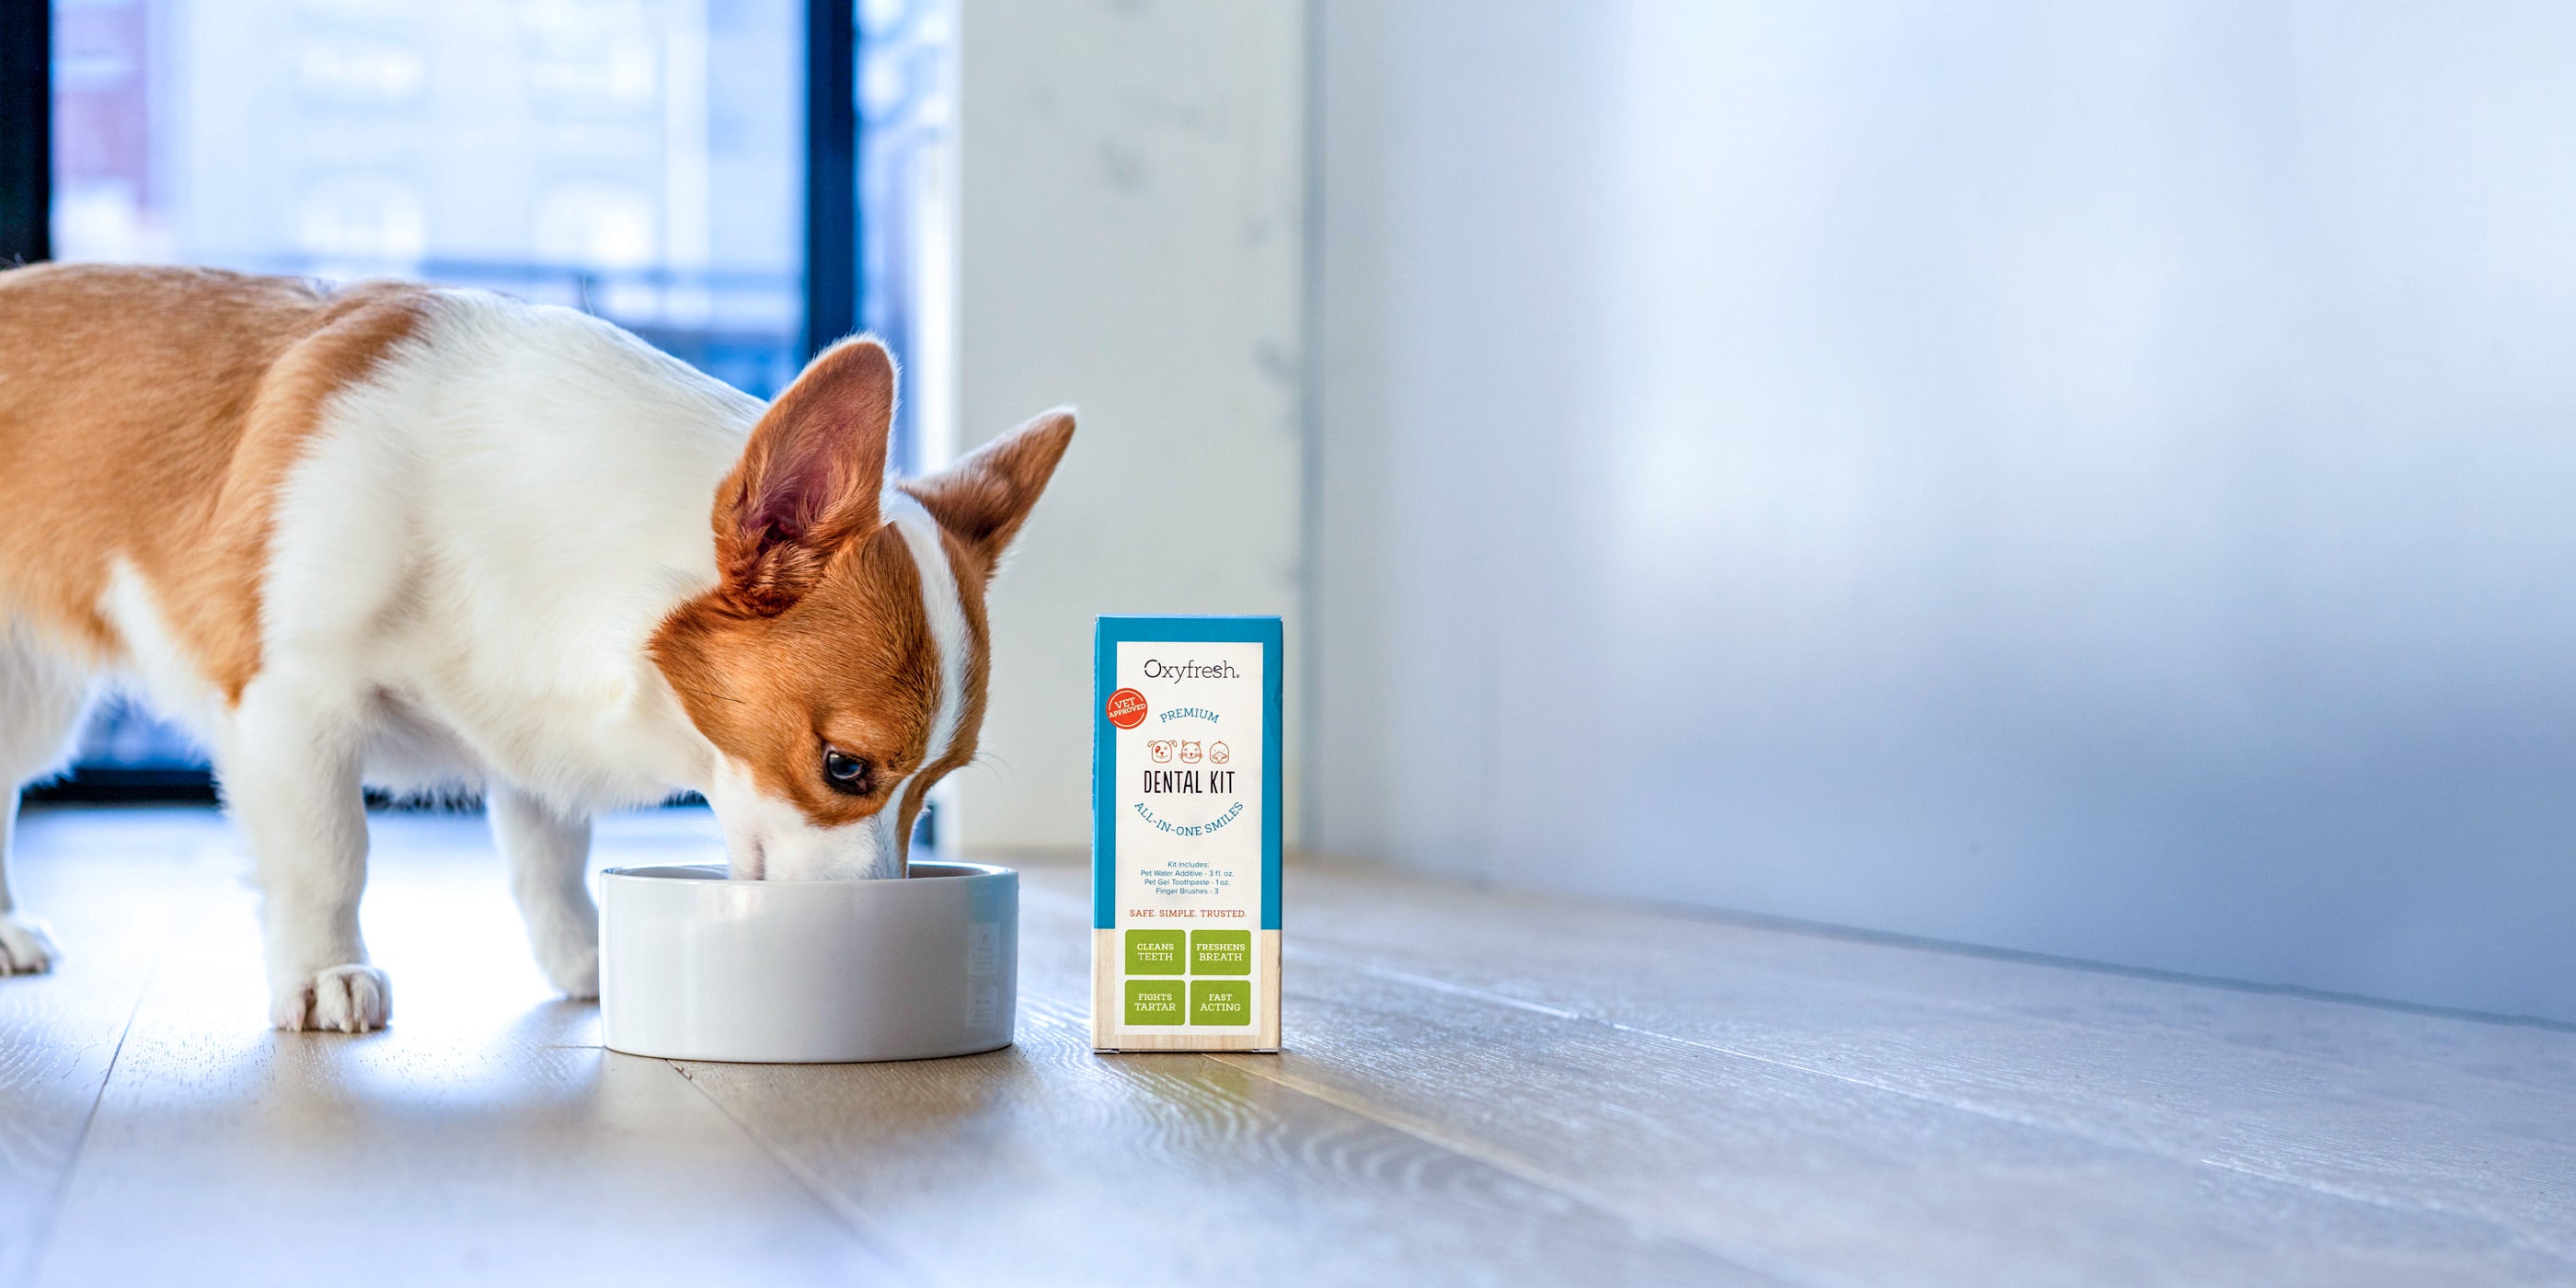 corgi-drinking-oxyfresh-pet-dental-water-additive-to-help-with-plaque-and-tartar-from-pet-dental-kit